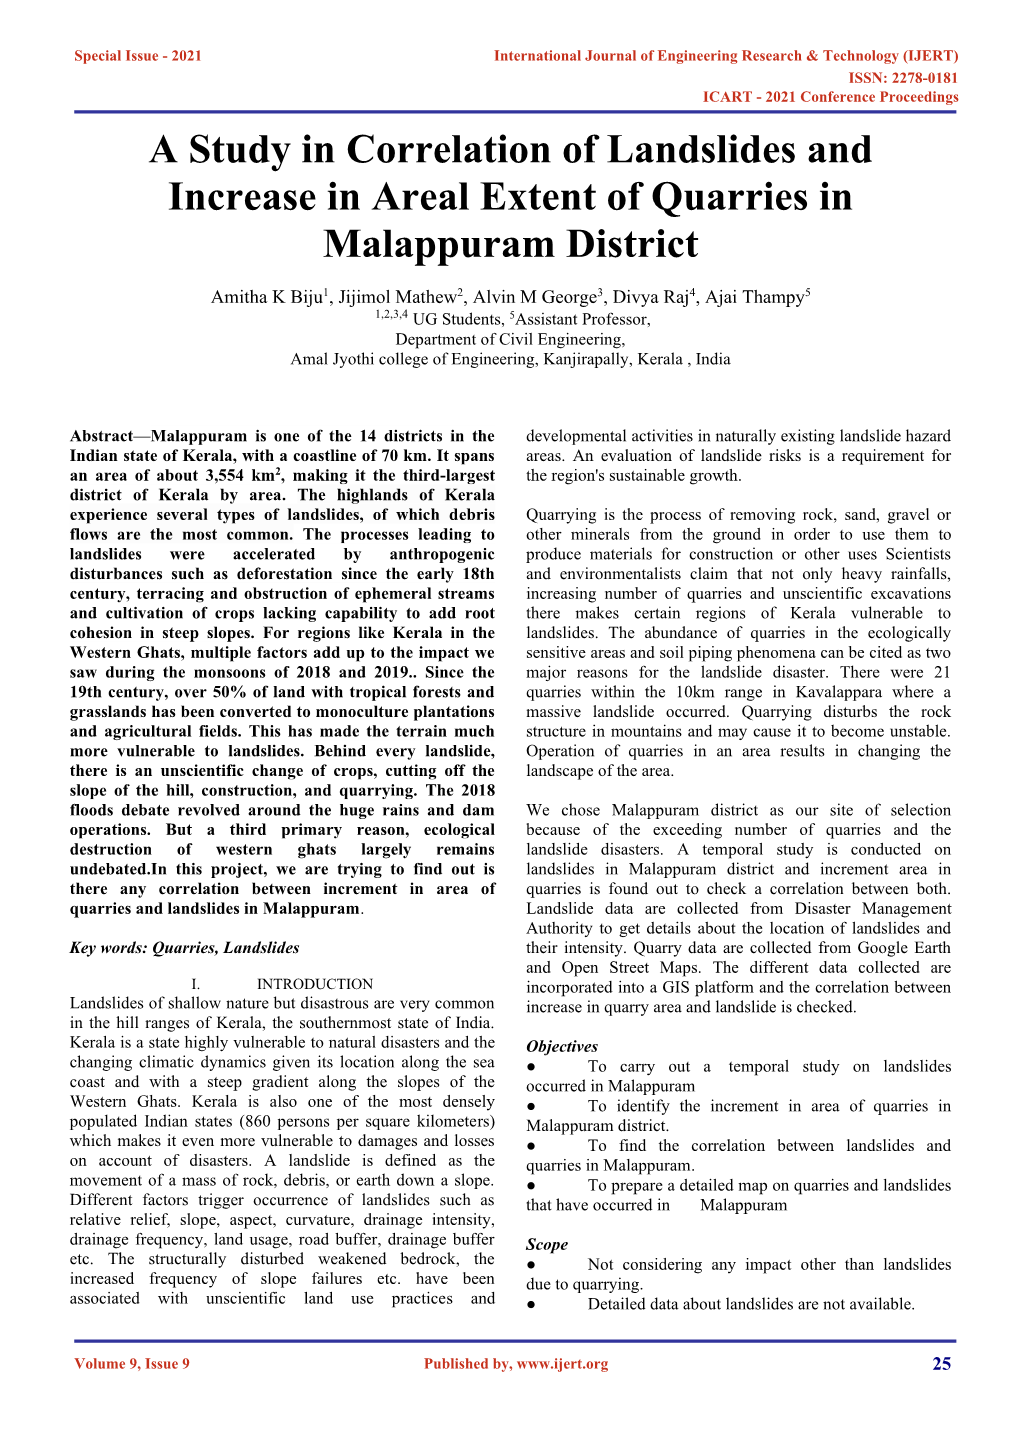 A Study in Correlation of Landslides and Increase in Areal Extent of Quarries in Malappuram District